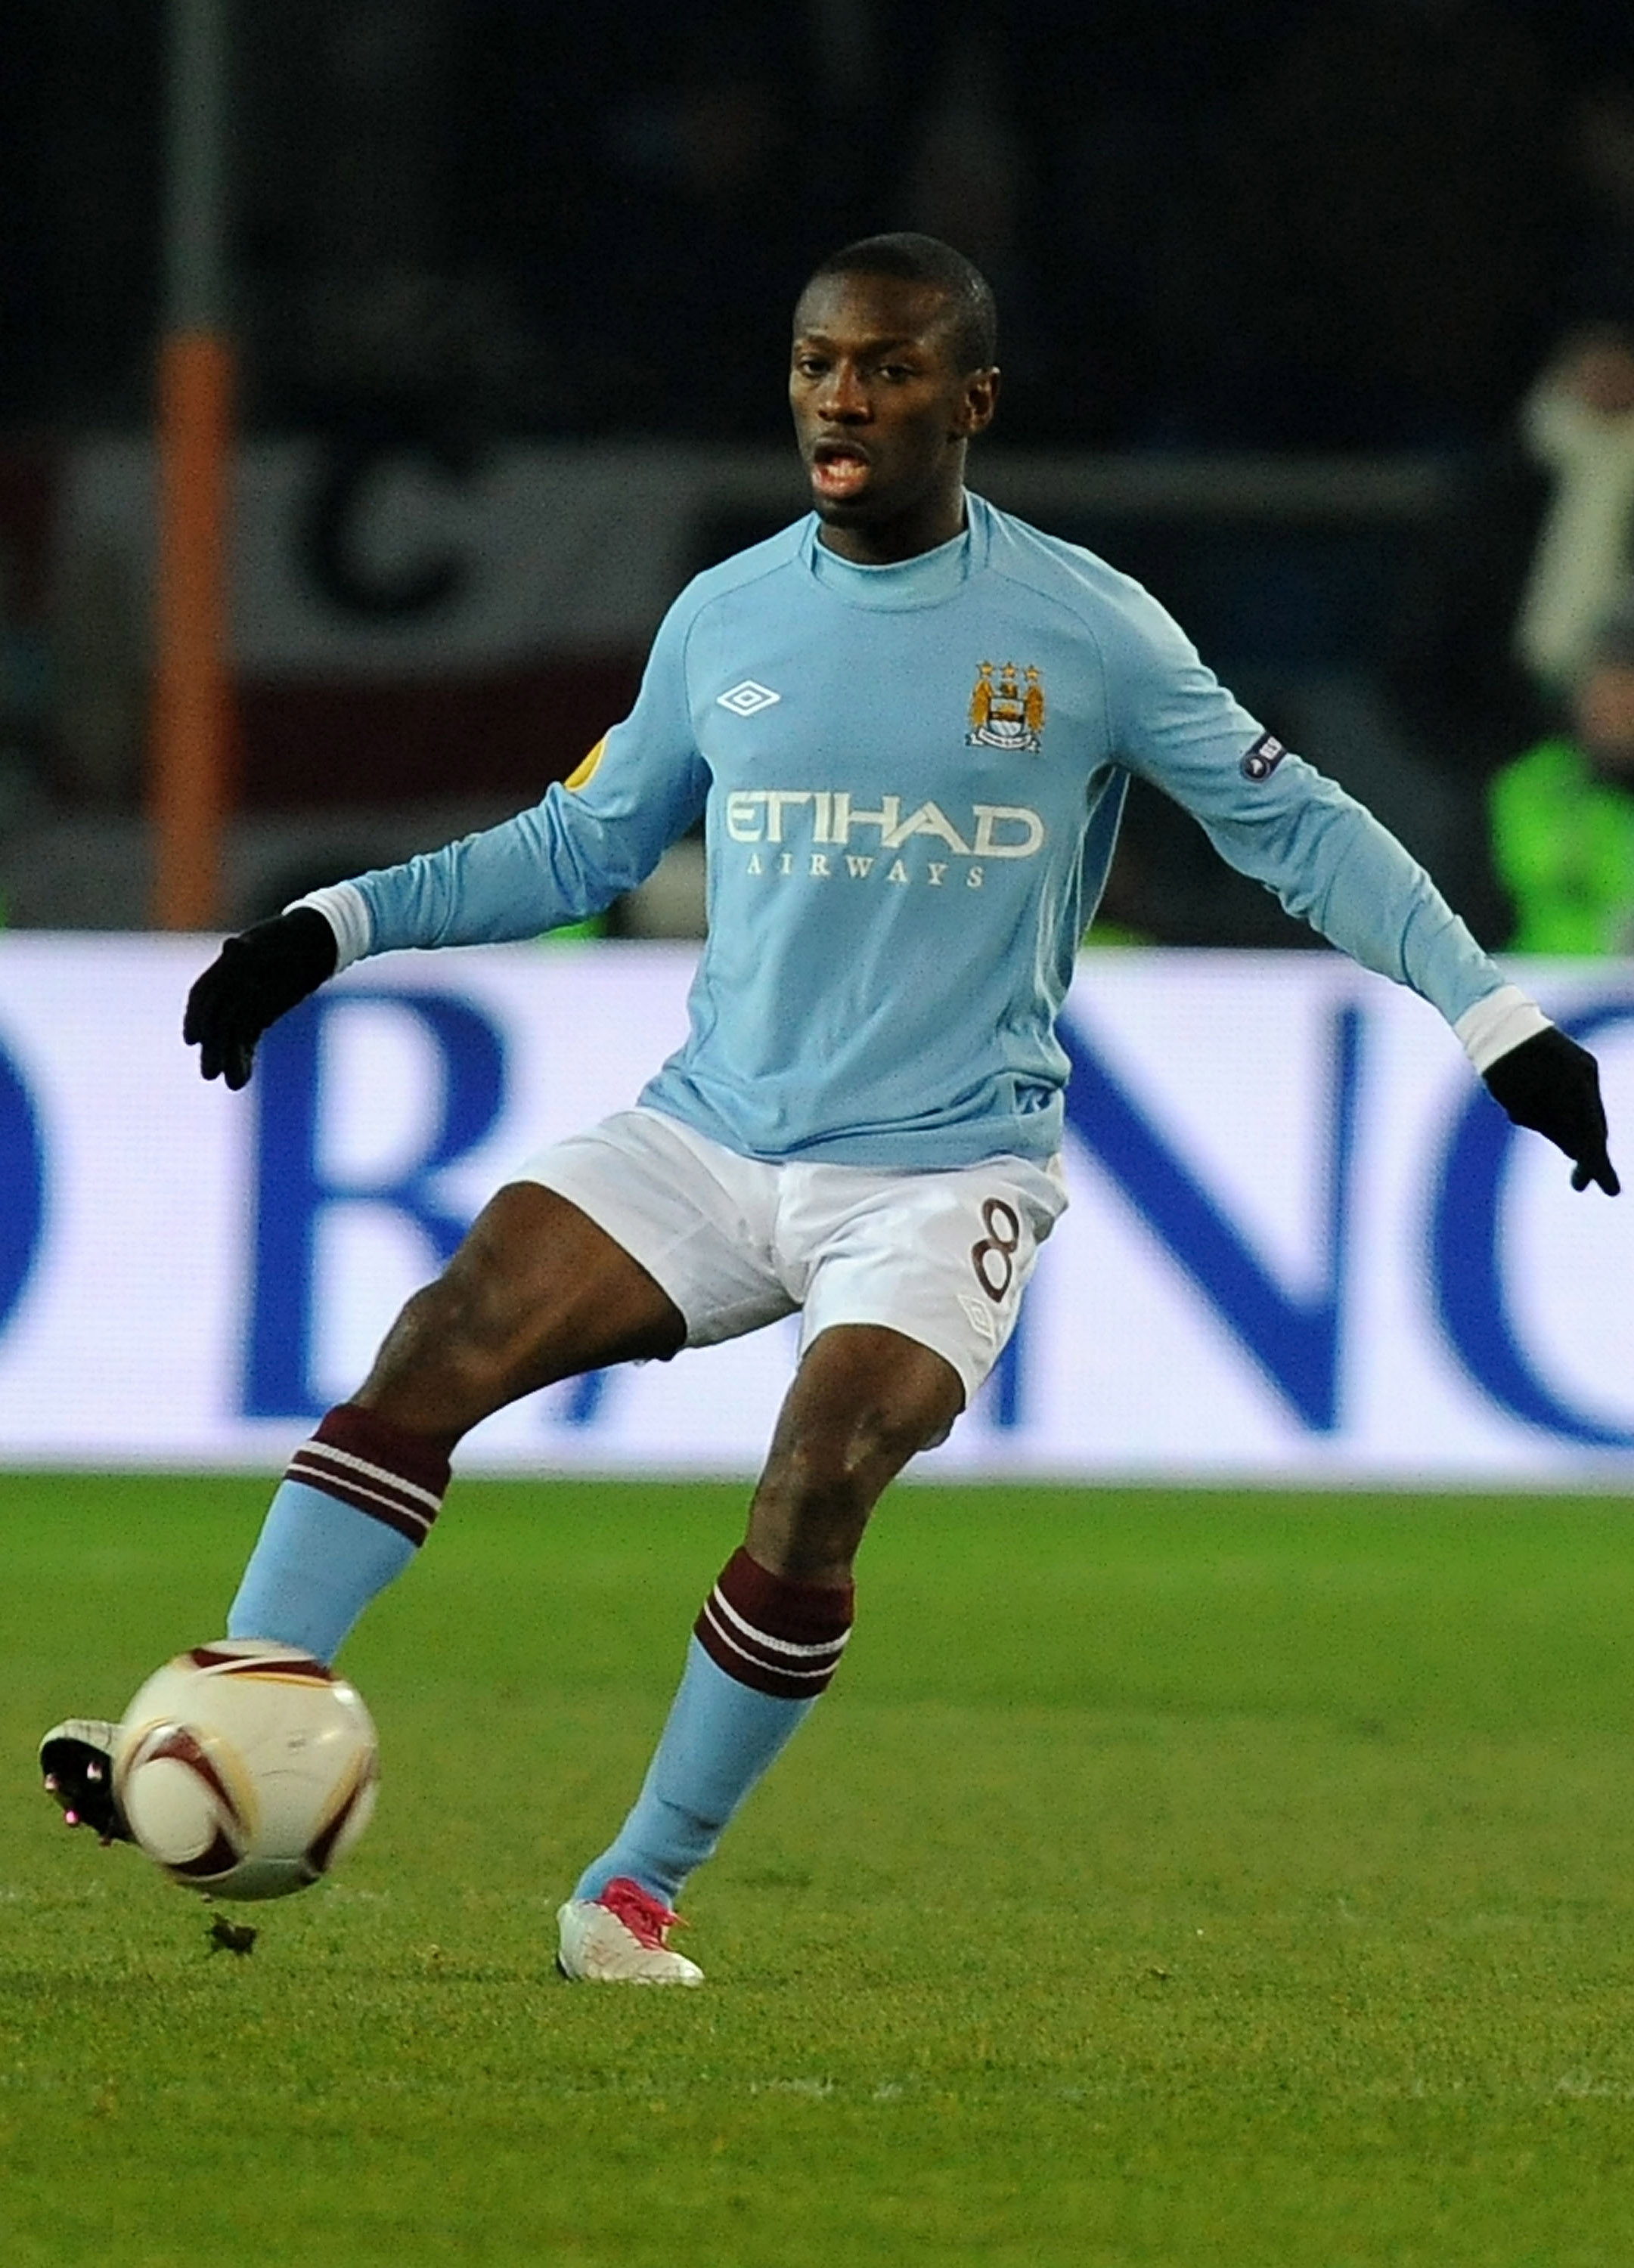 TURIN, ITALY - DECEMBER 16: Shaun Wright-Phillips of Manchester City in action during the UEFA Europa League group A match between Juventus FC and Manchester City at Stadio Olimpico di Torino on December 16, 2010 in Turin, Italy. (Photo by Massimo Cebrell